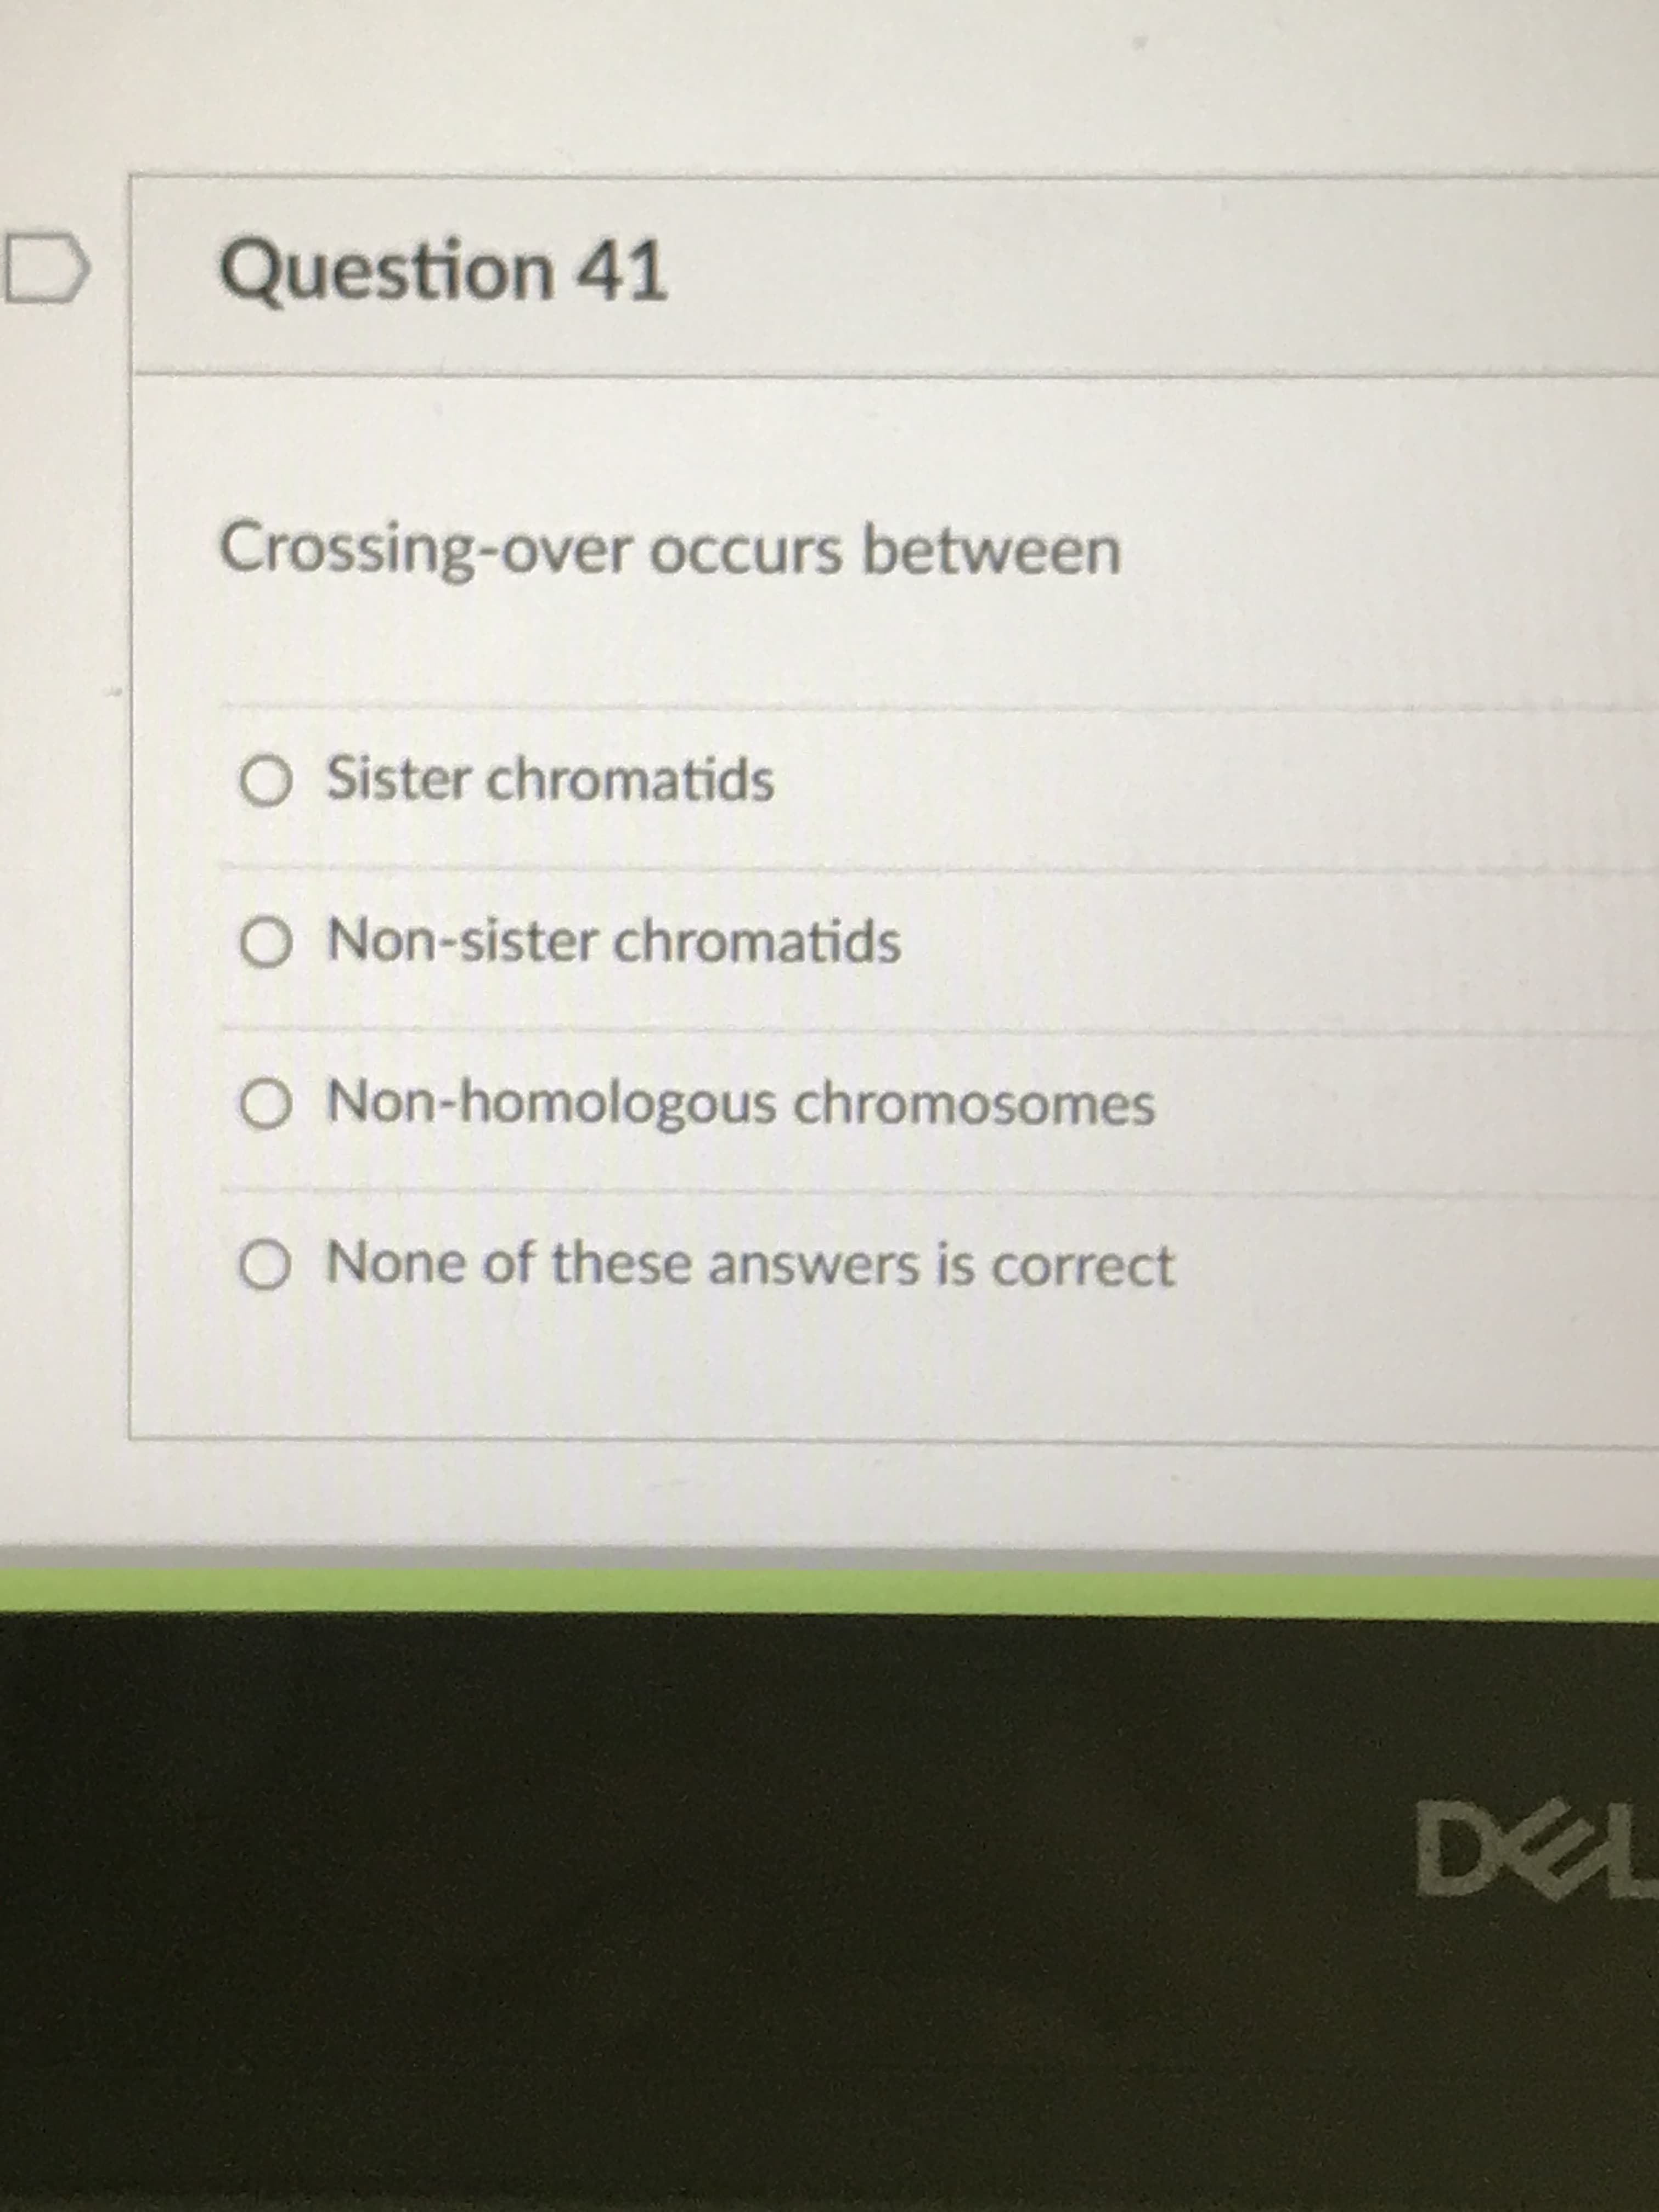 Crossing-over occurs between
O Sister chromatids
O Non-sister chromatids
O Non-homologous chromosomes
O None of these answers is correct
